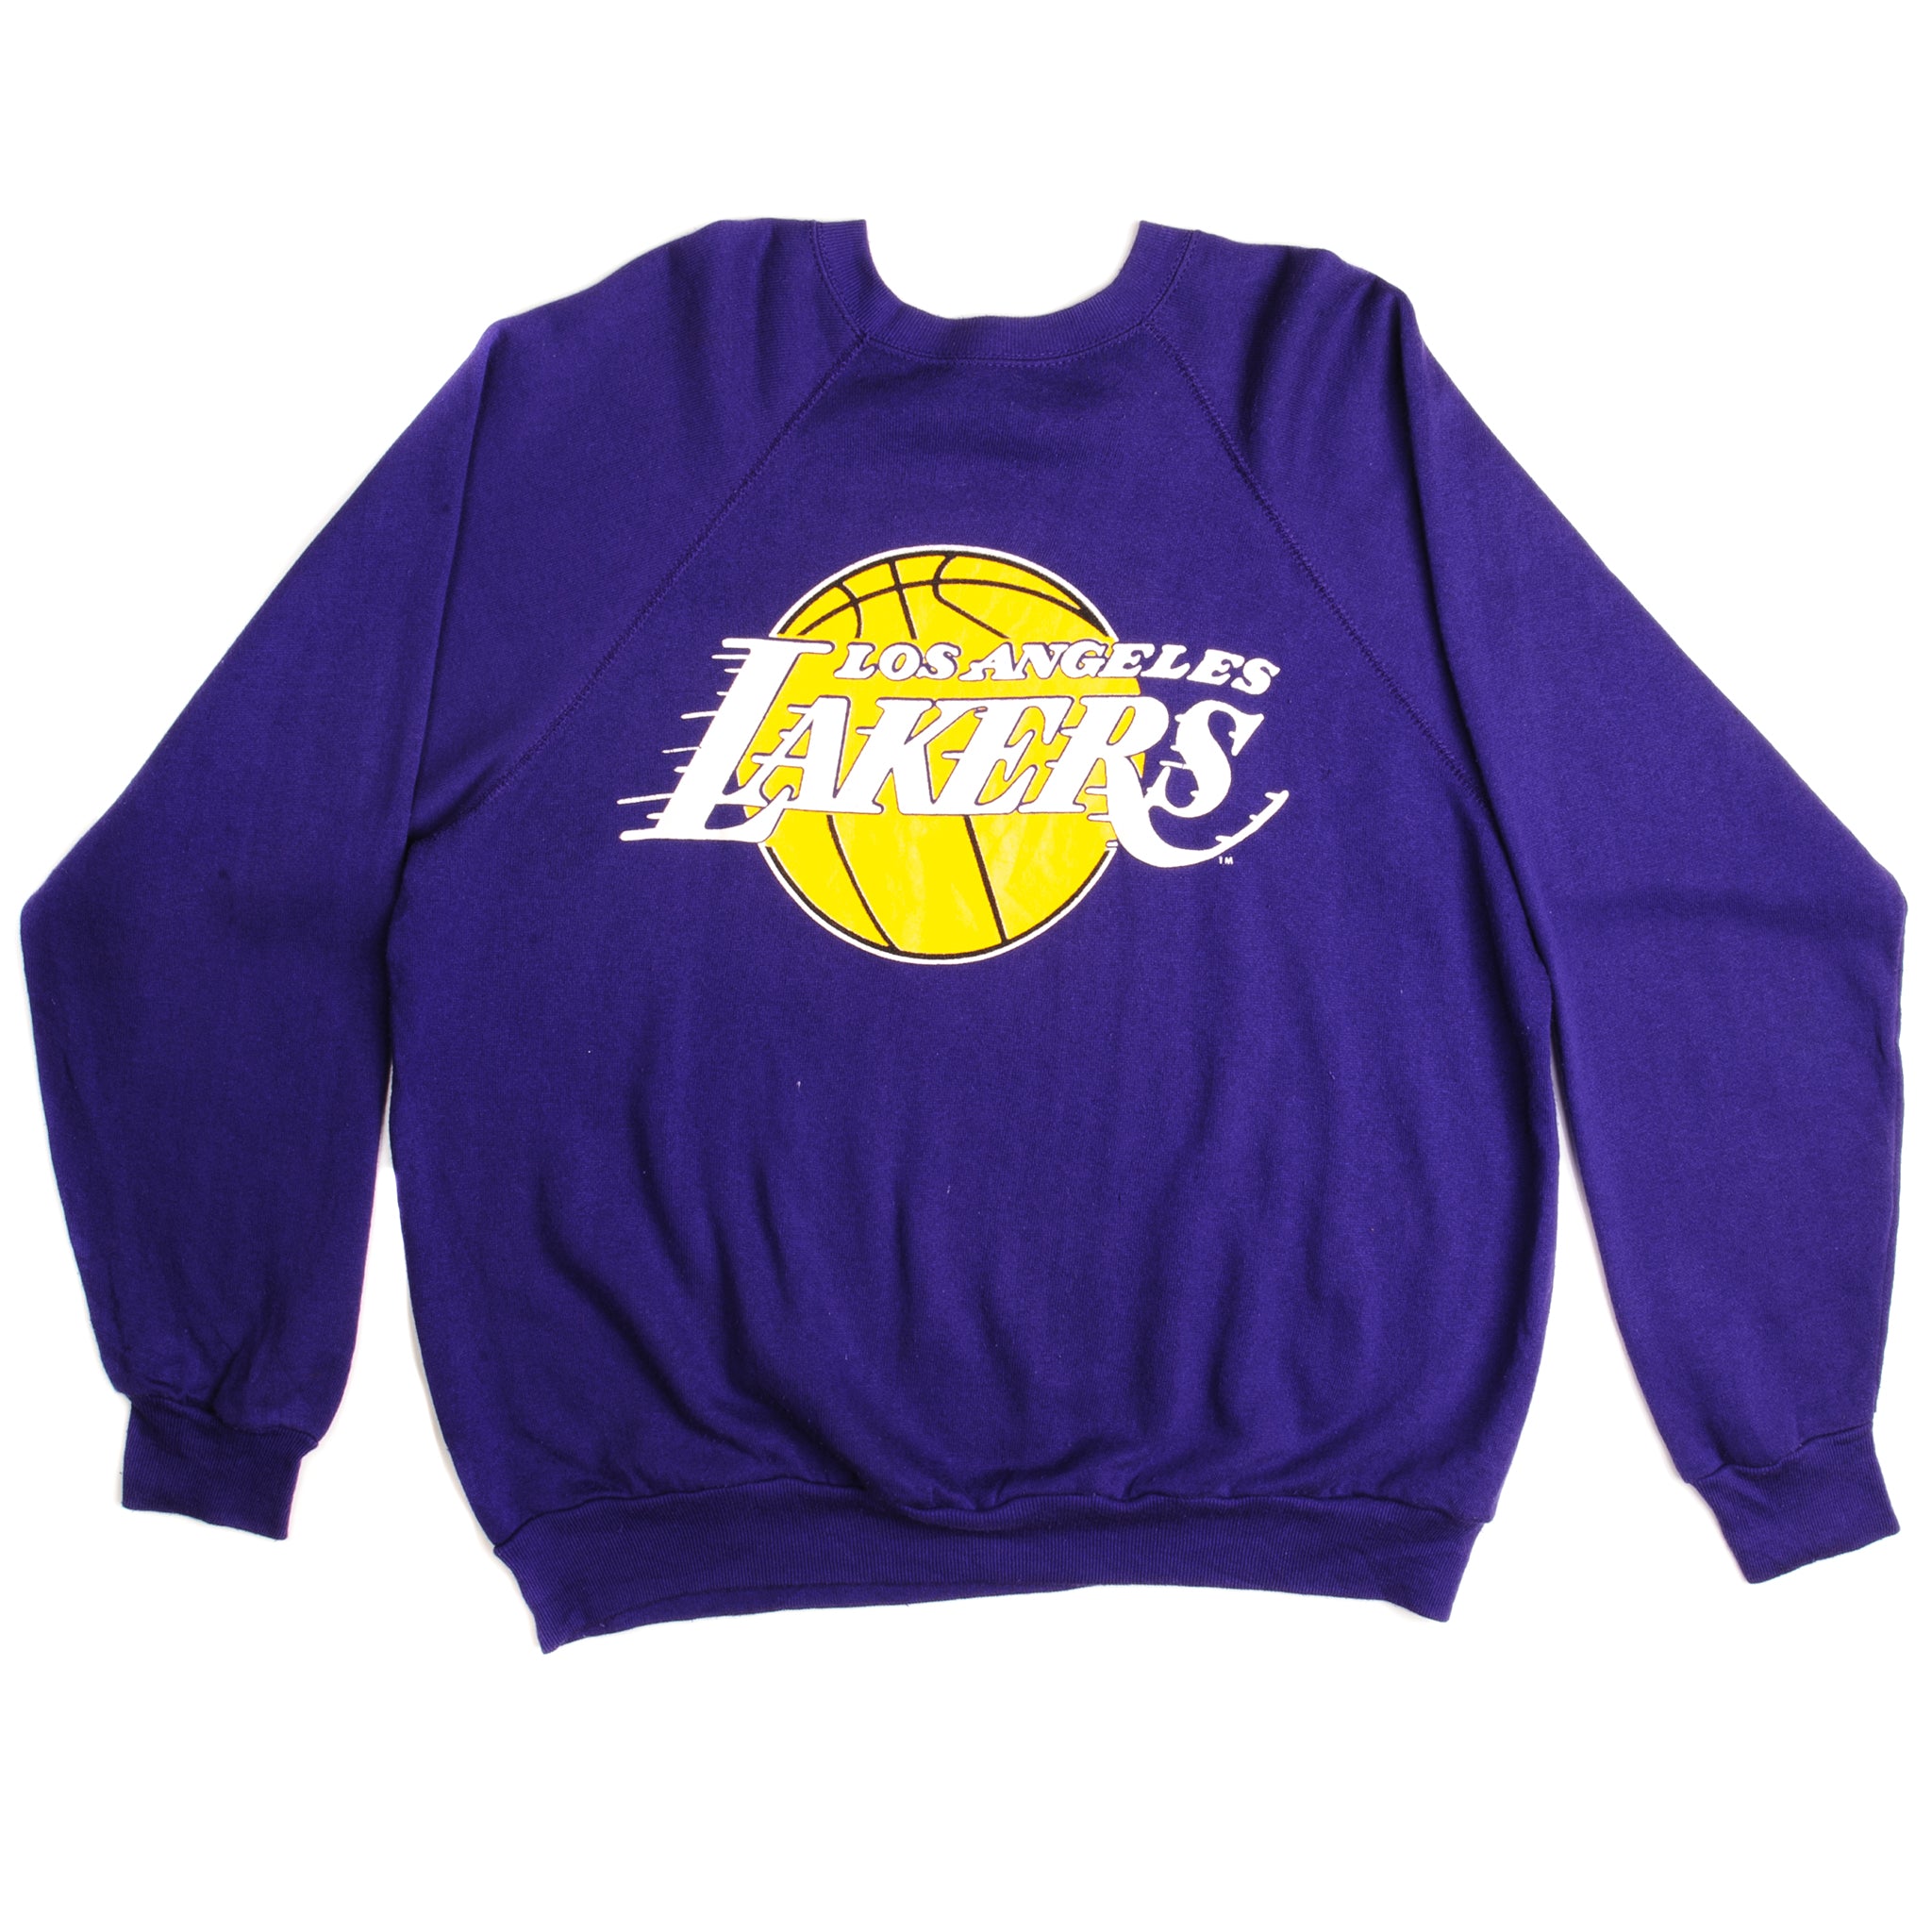 Made in USA 90s Lakers Hoodie Large - $40 Available now